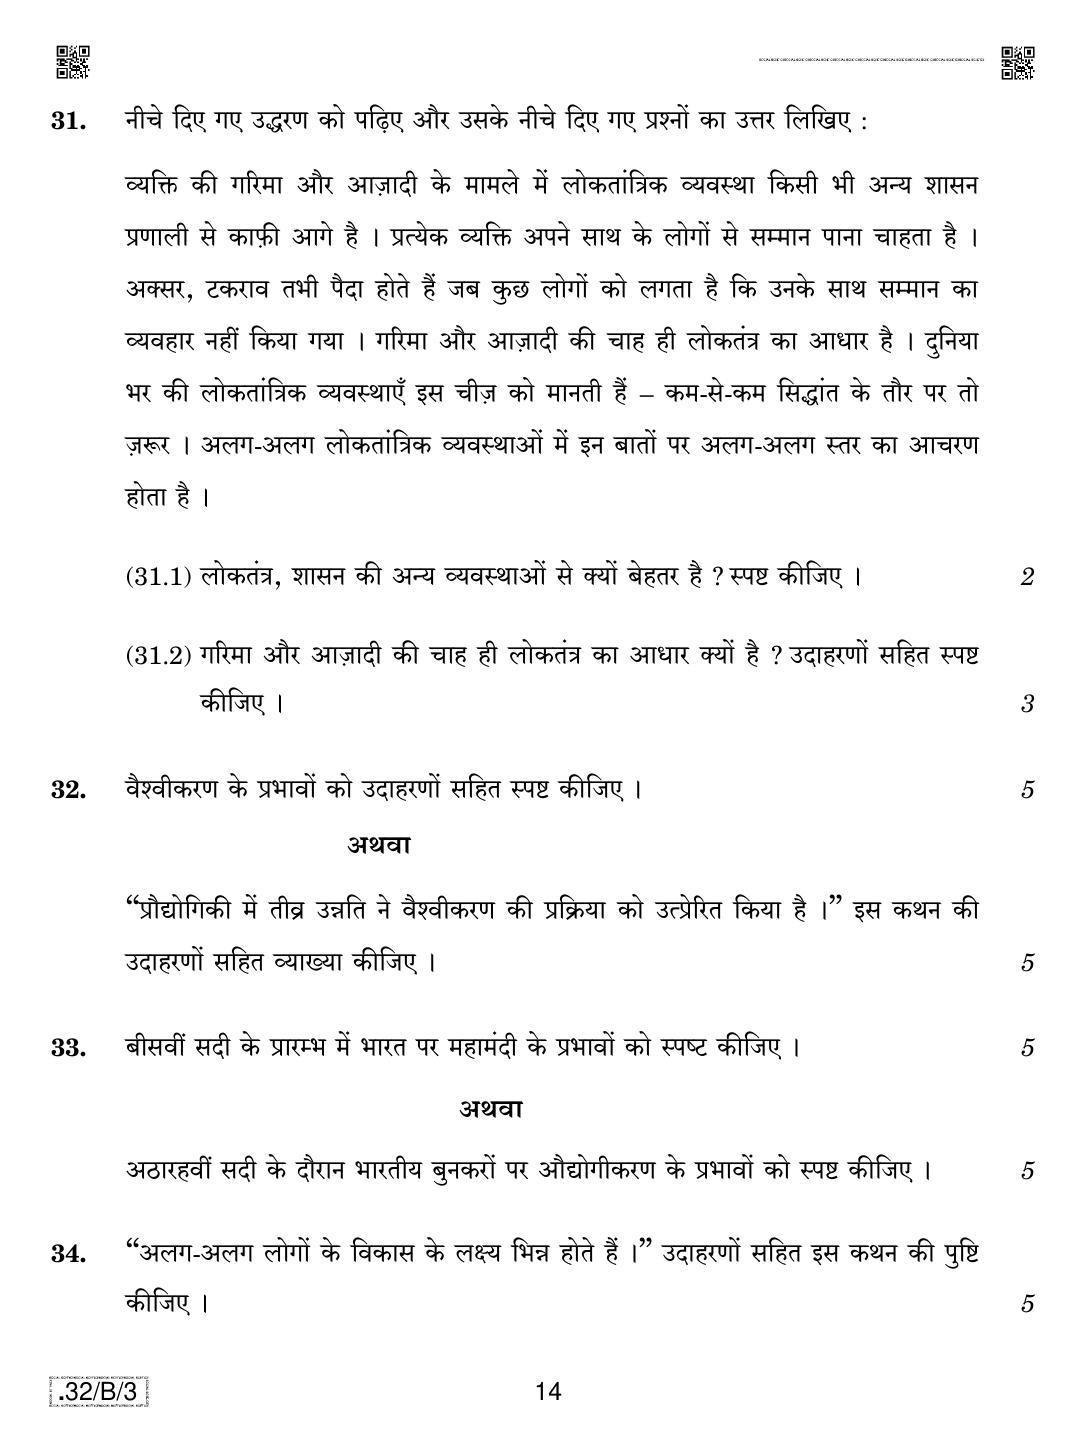 CBSE Class 10 32-C-3 Social Science 2020 Compartment Question Paper - Page 14